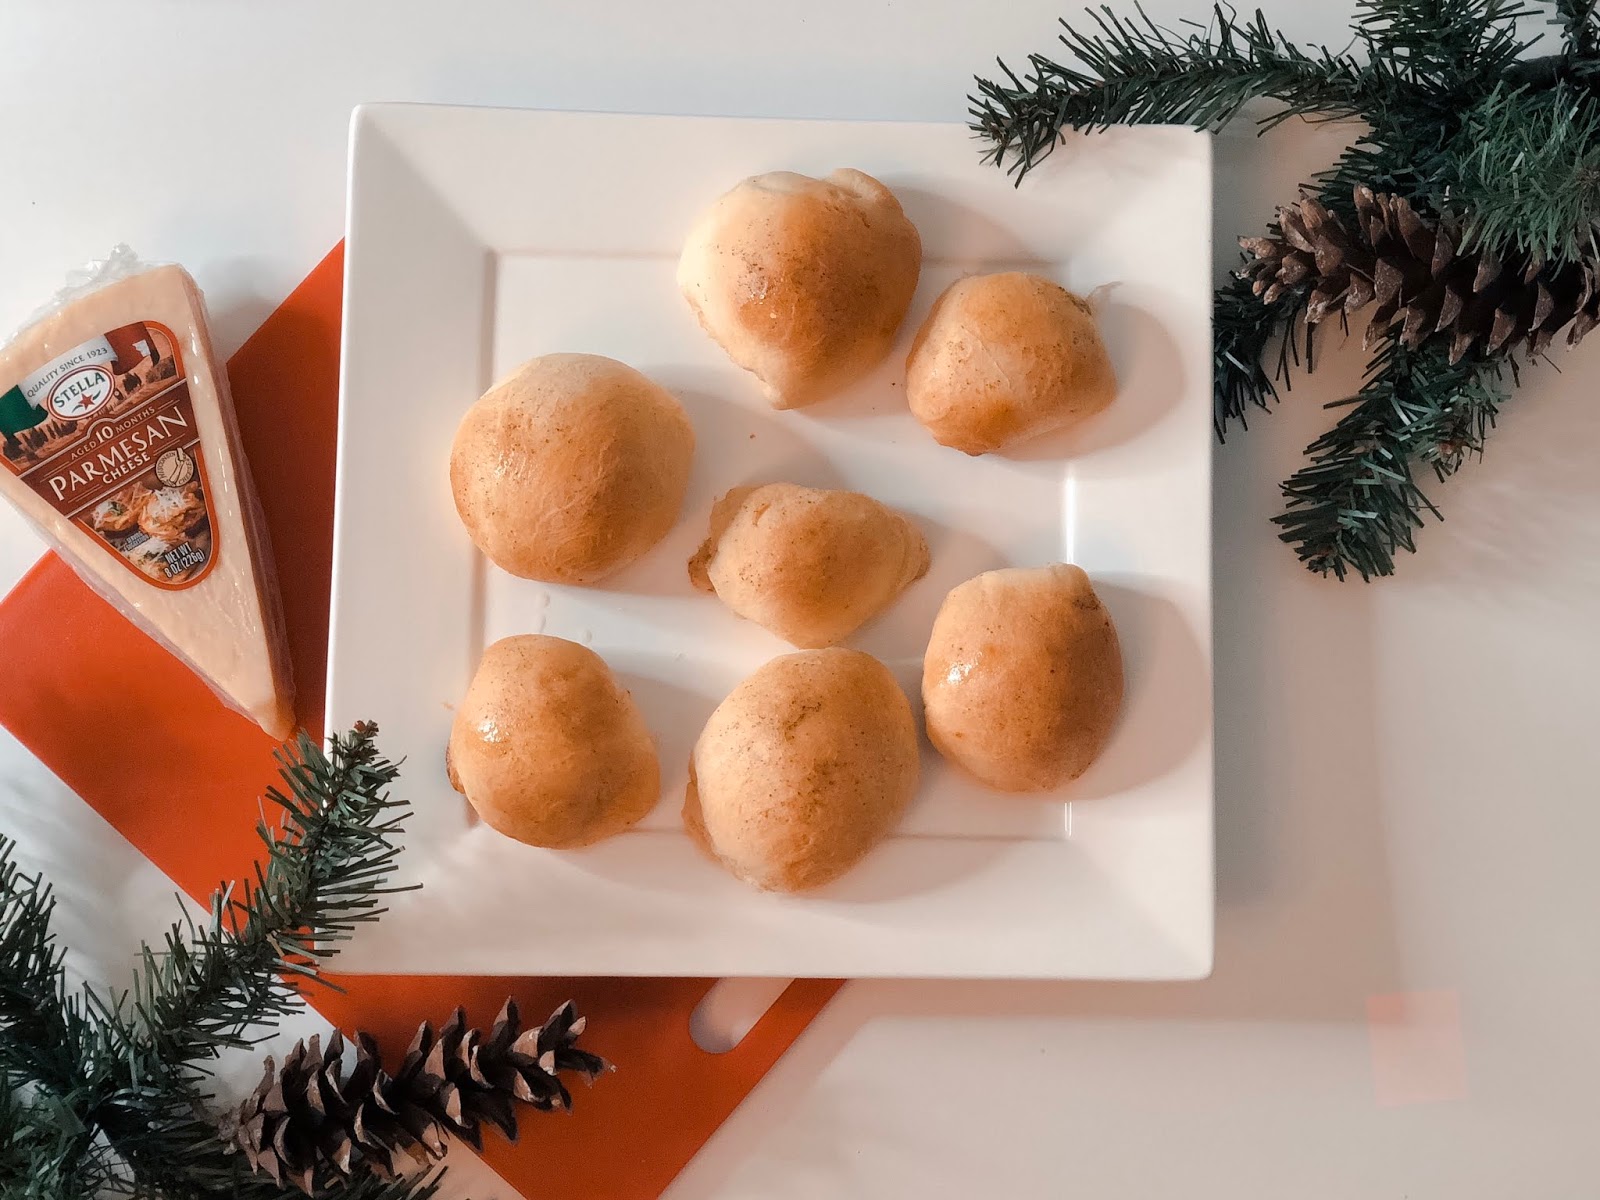 stella cheese, parmesan cheese, holiday food, easy recipes, appetizers, parmesan cresent balls